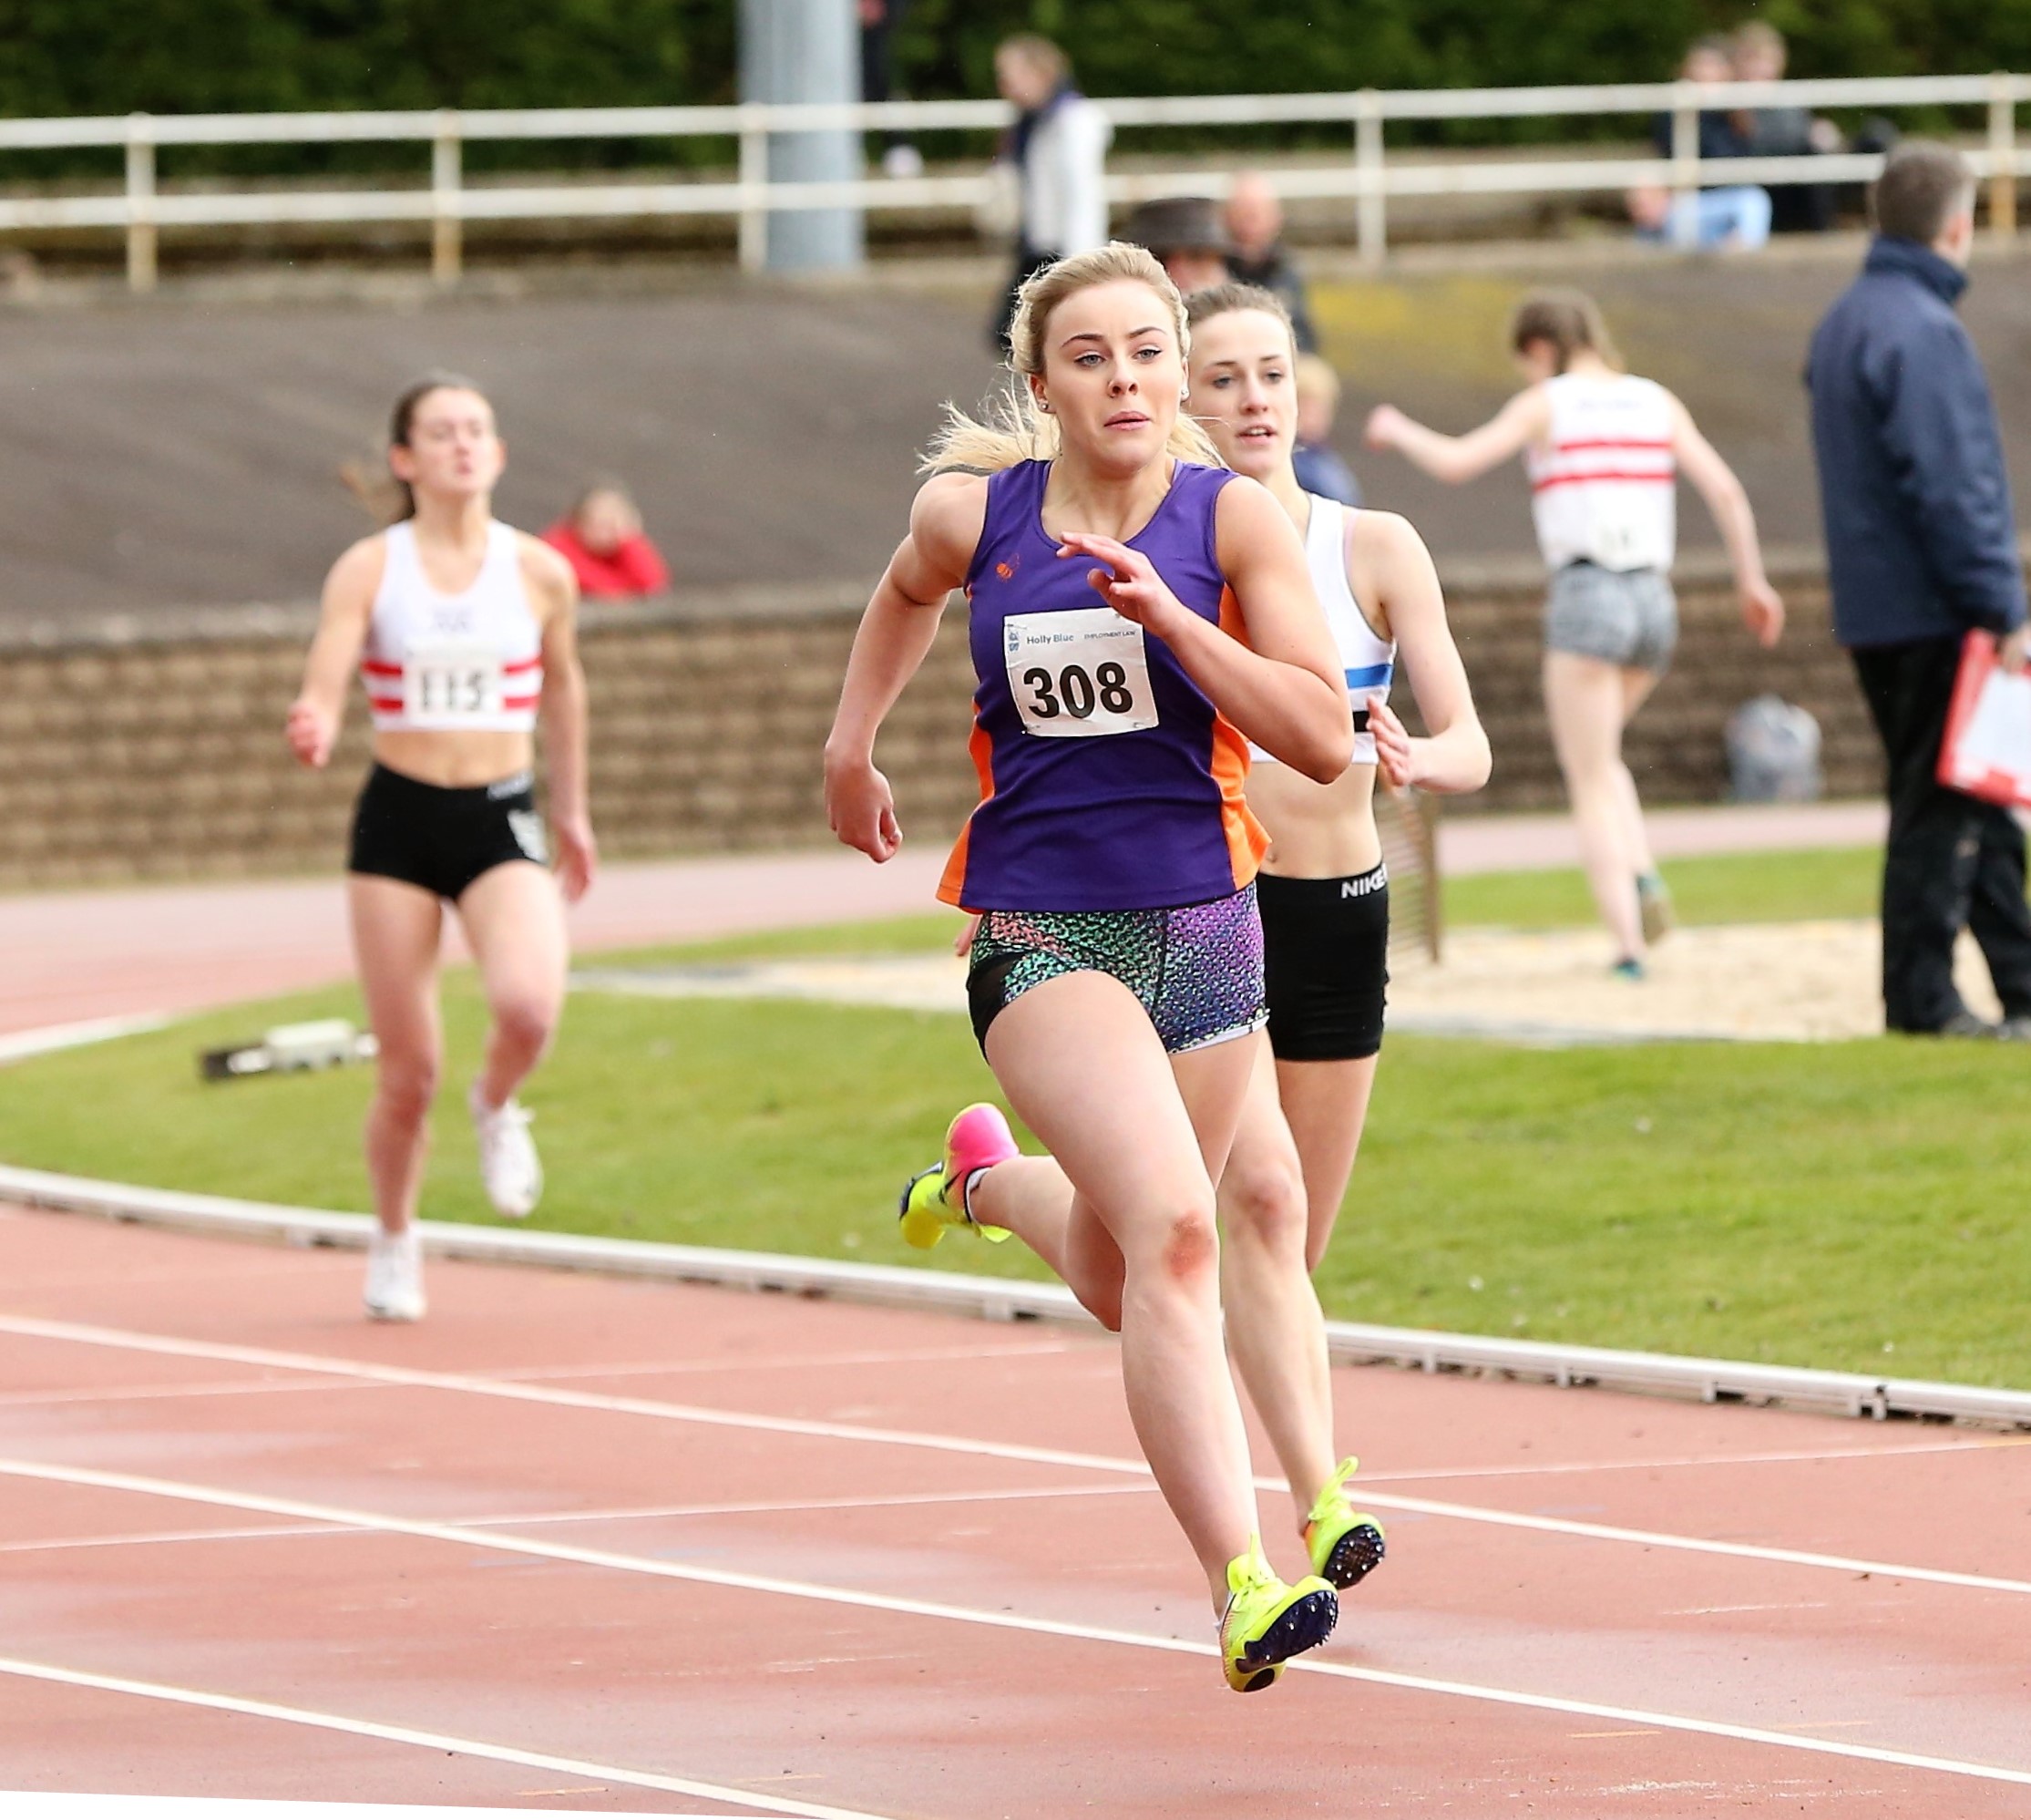 Katie Sharkey (308) showing fine form in the 200m